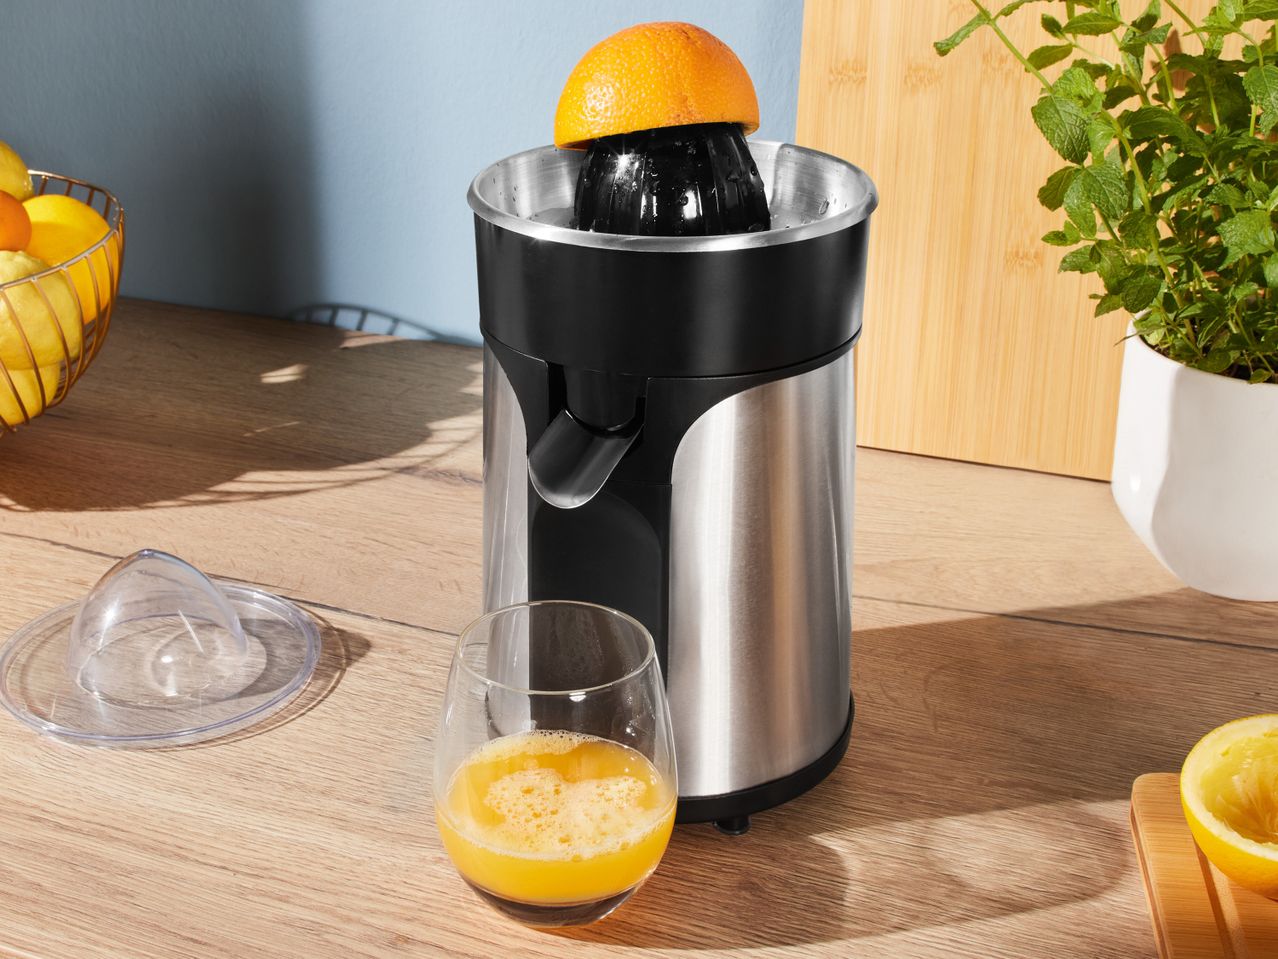 Go to full screen view: Citrus Juicer - Image 3